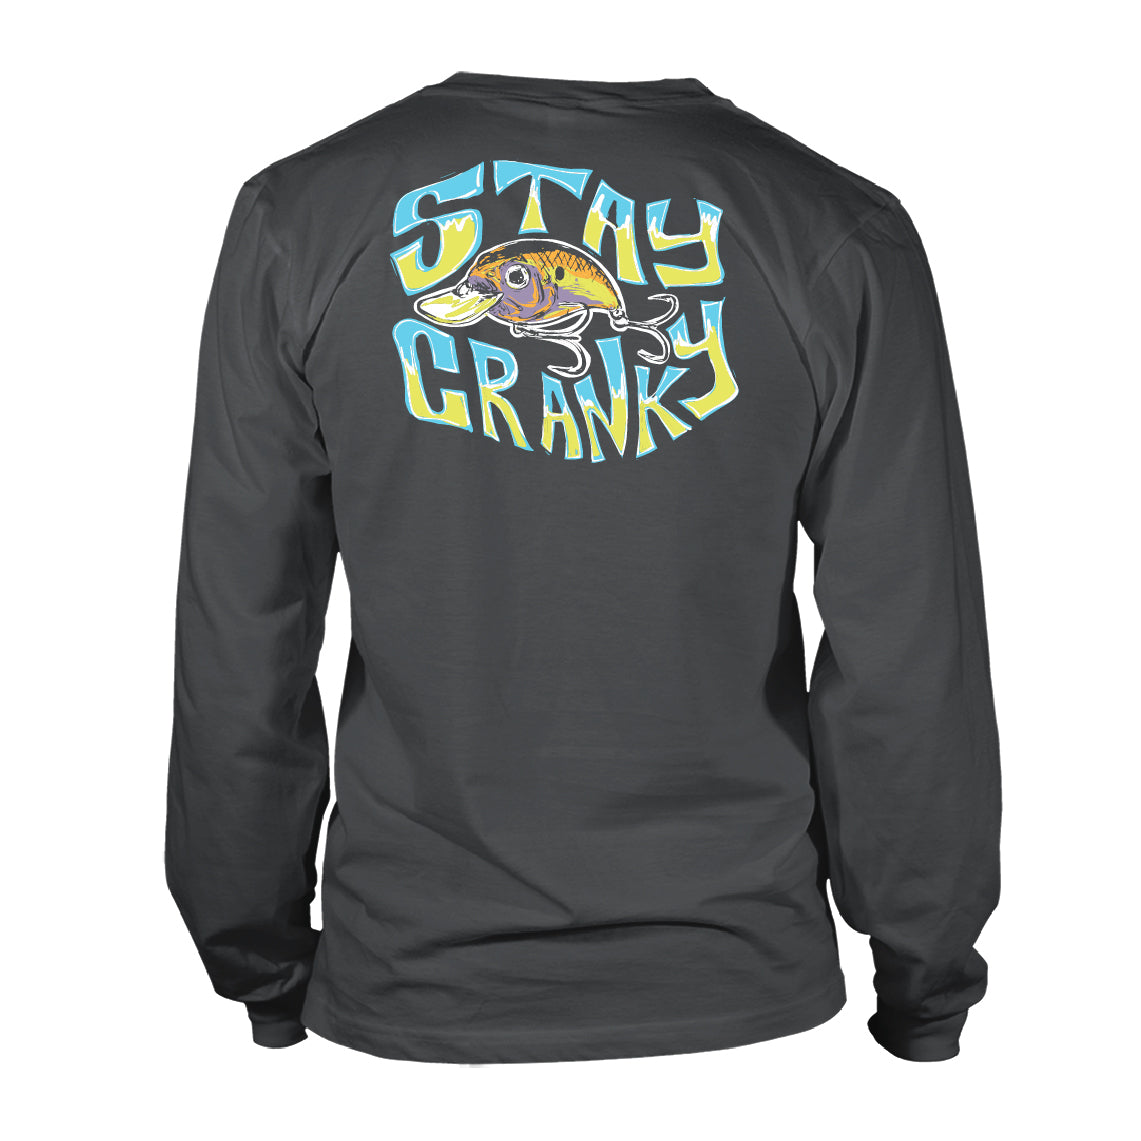 Toddler Long Sleeve Cotton Tee - Stay Cranky V3 - Pepper